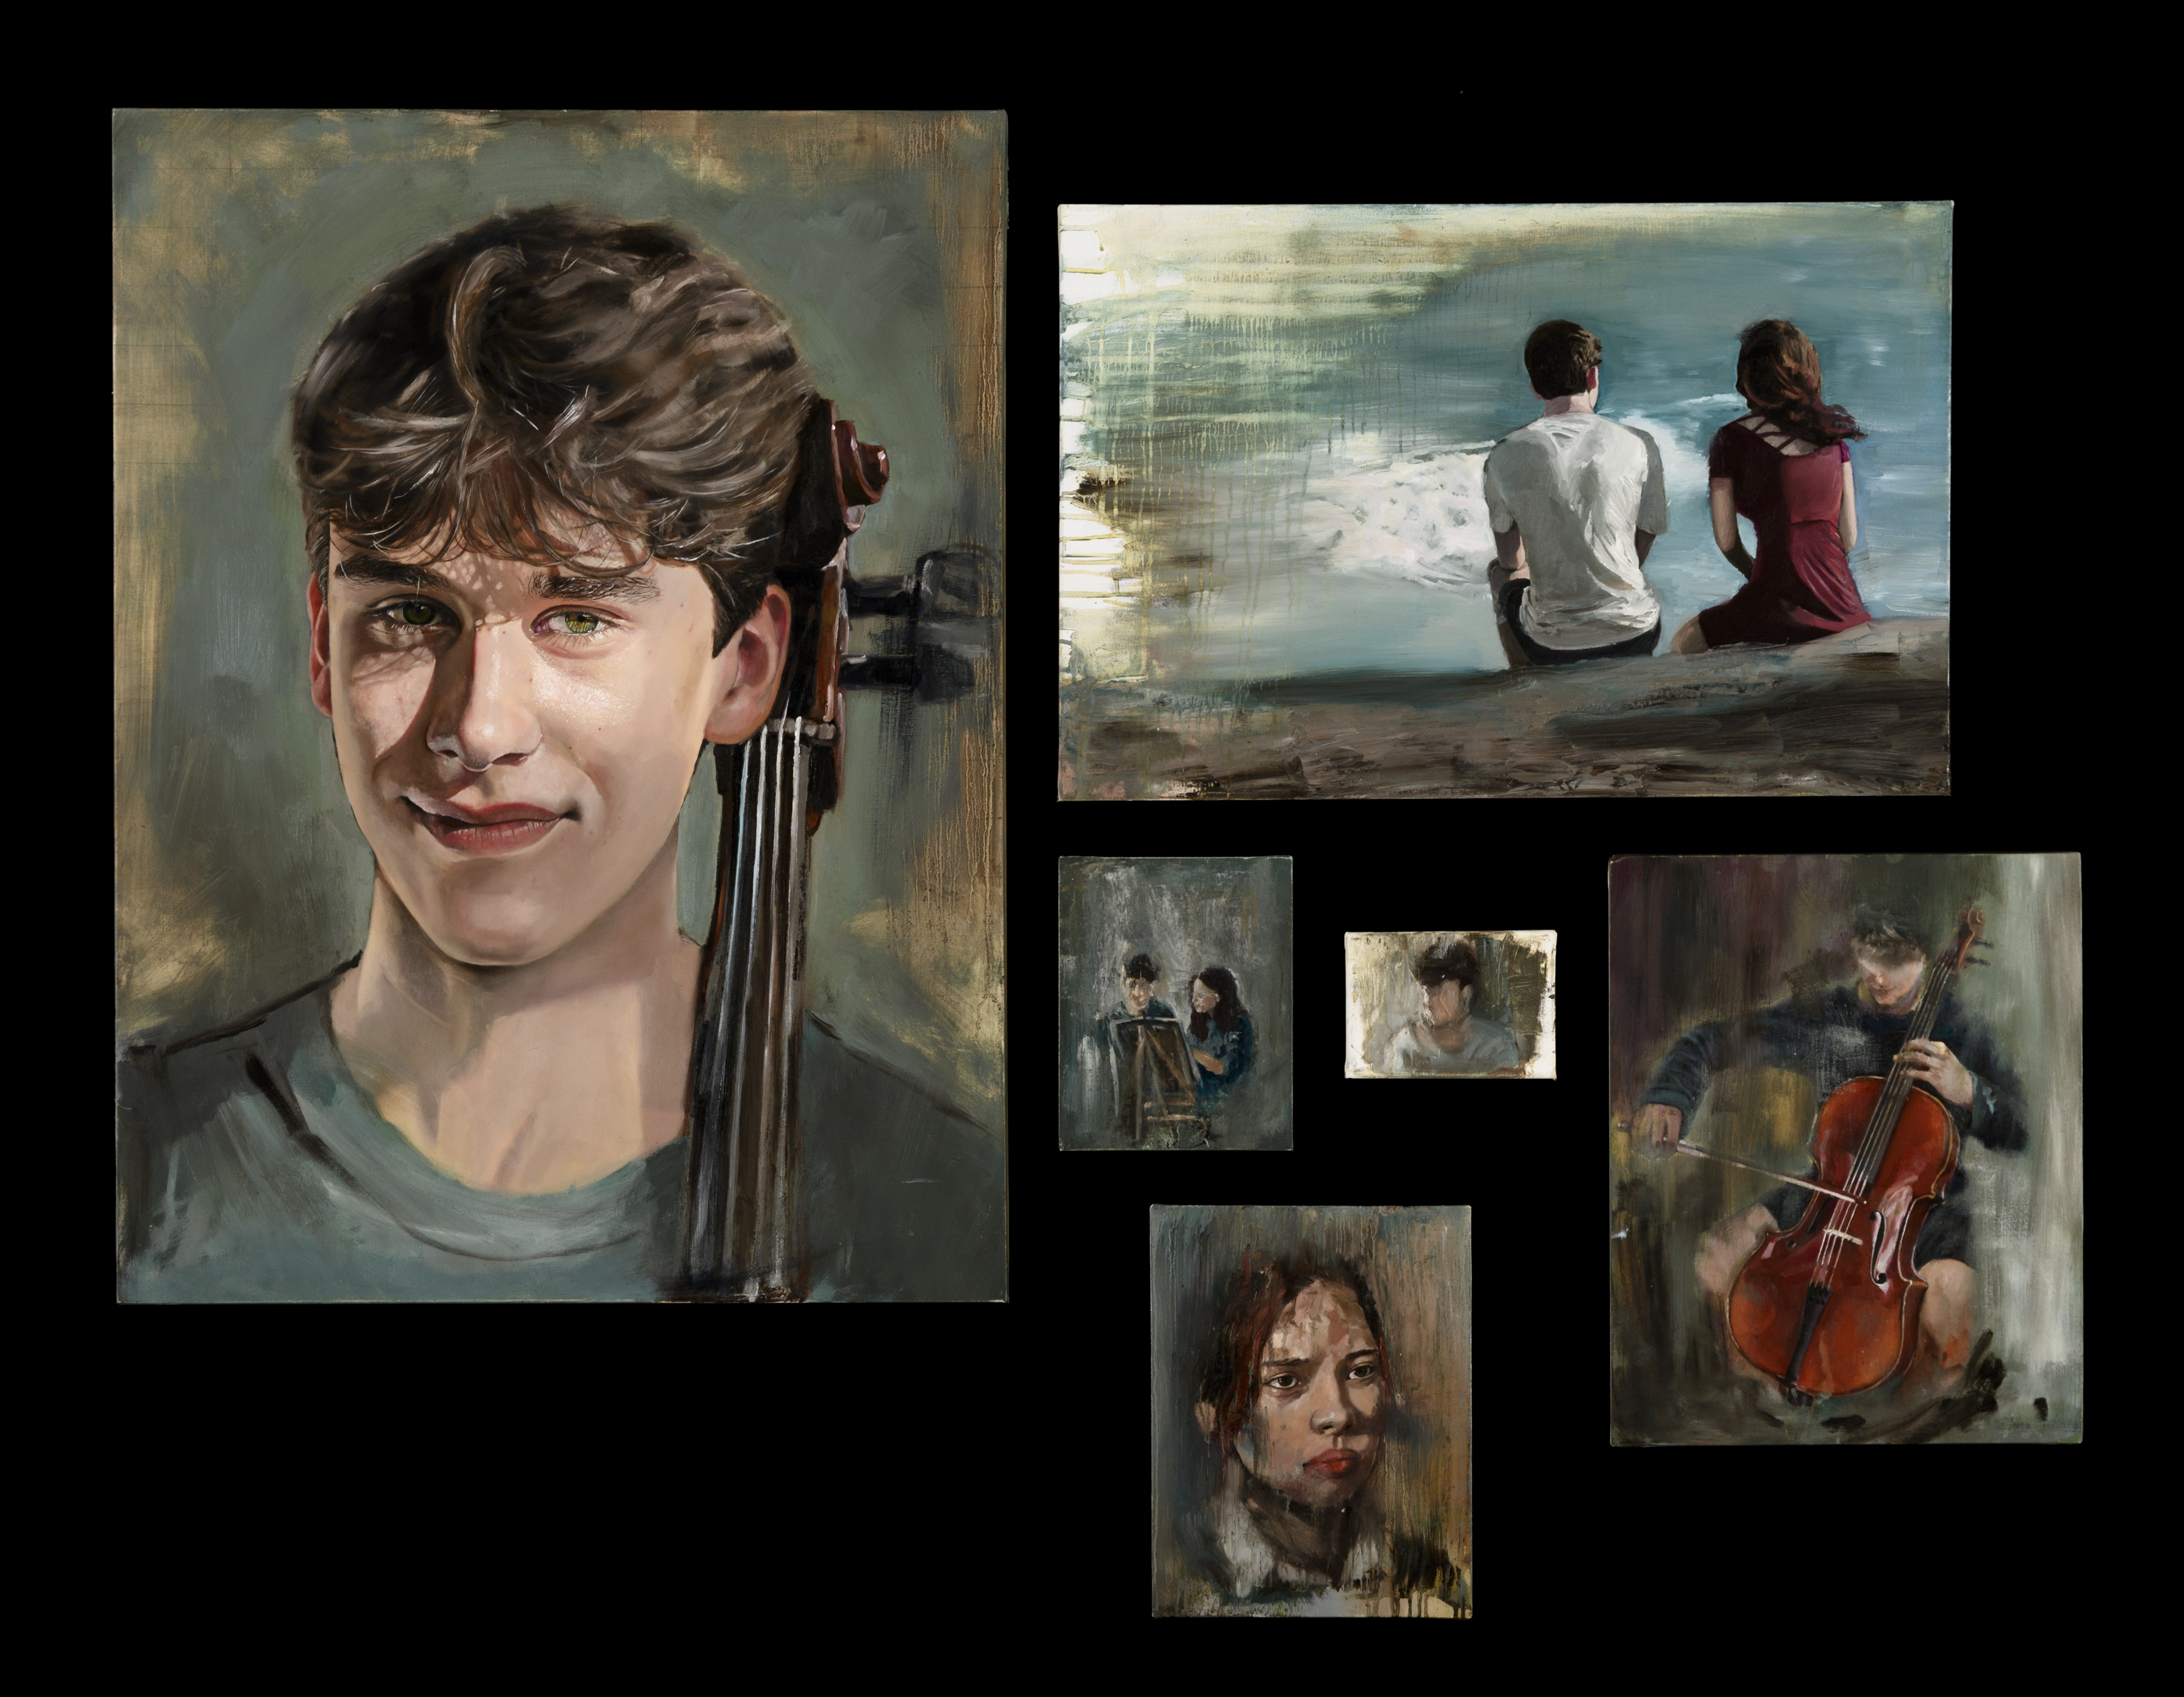 A series of paintings, some portraits and some featuring a large string instrument.